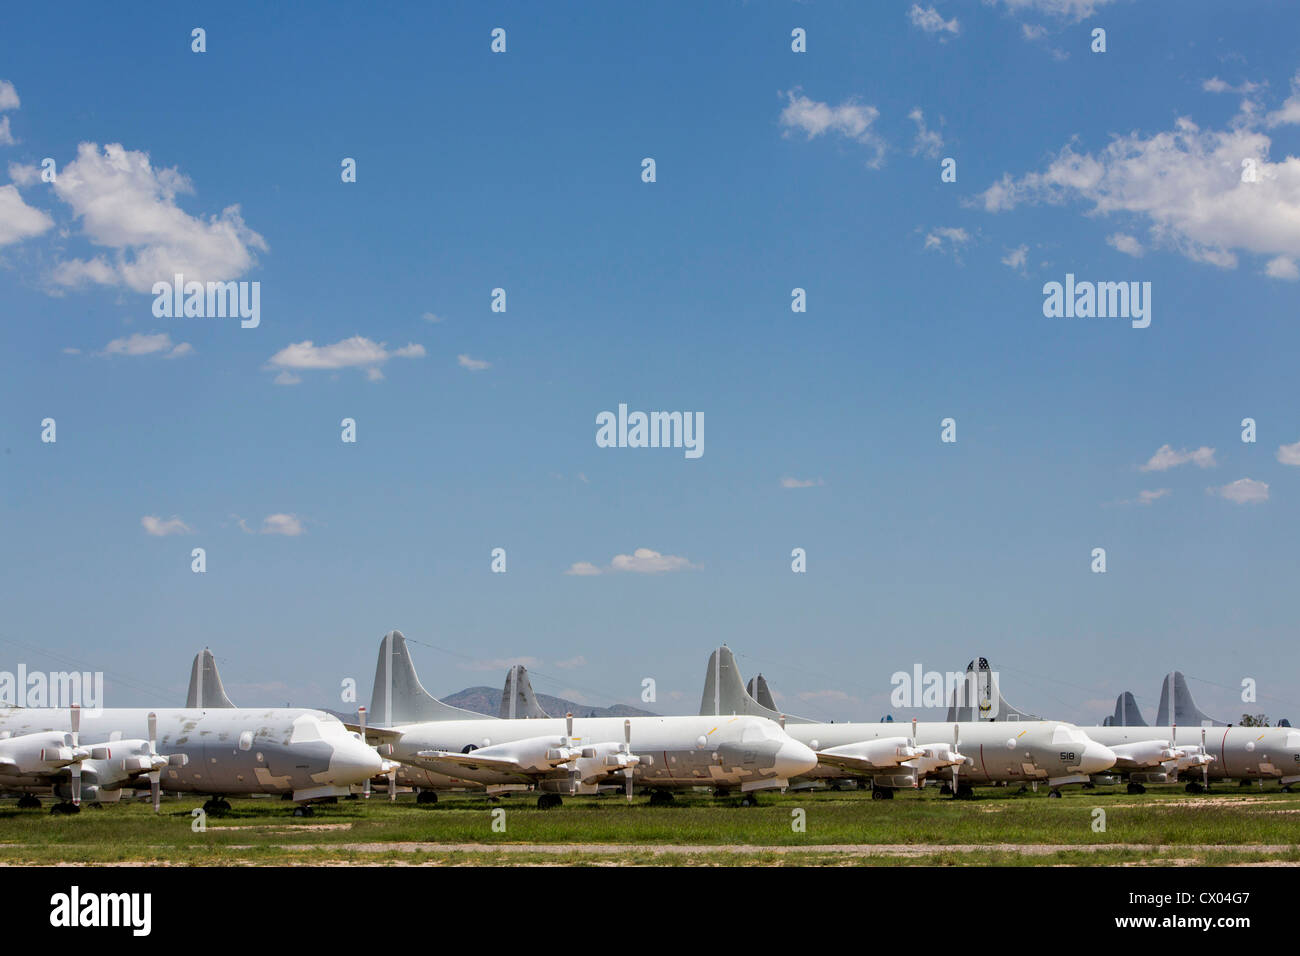 P-3 Orion aircraft in storage at the 309th Aerospace Maintenance and Regeneration Group at Davis-Monthan Air Force Base. Stock Photo